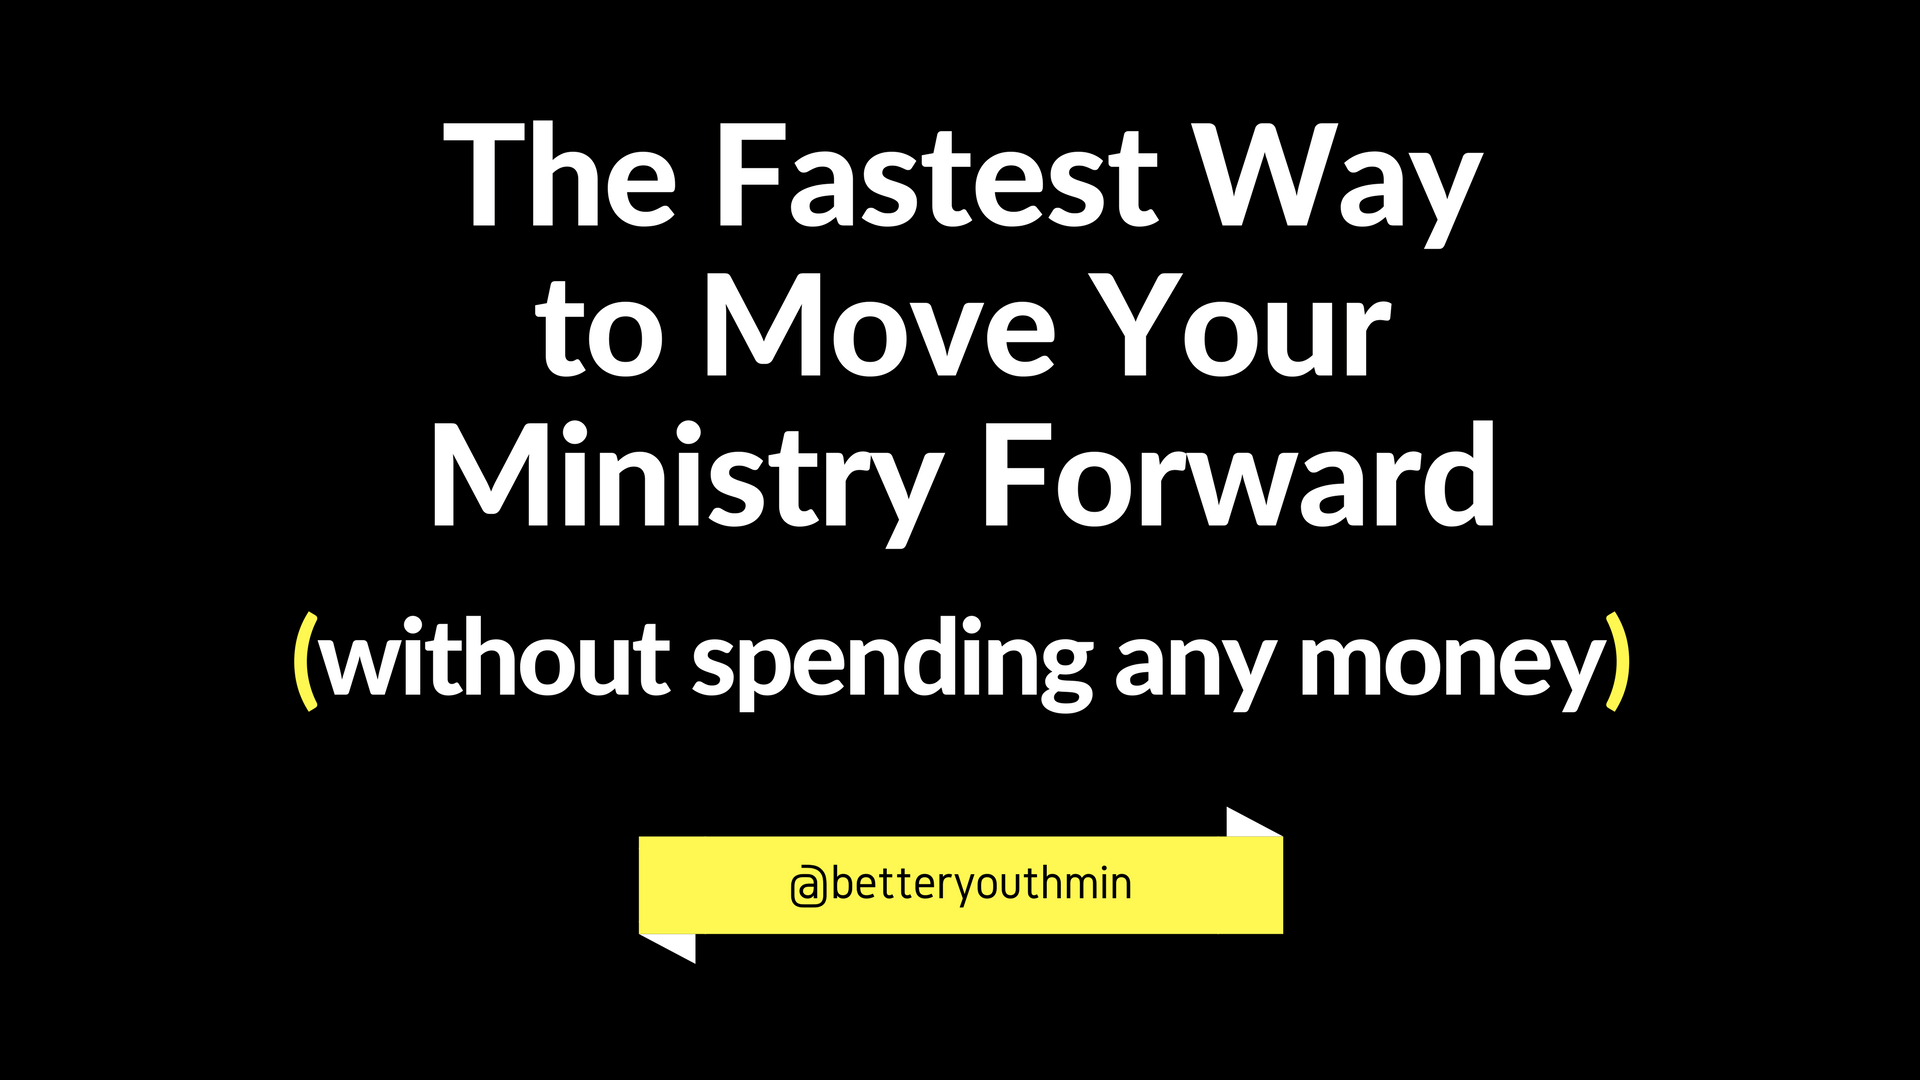 The Fastest Way to Move Your Ministry Forward (without spending any money)